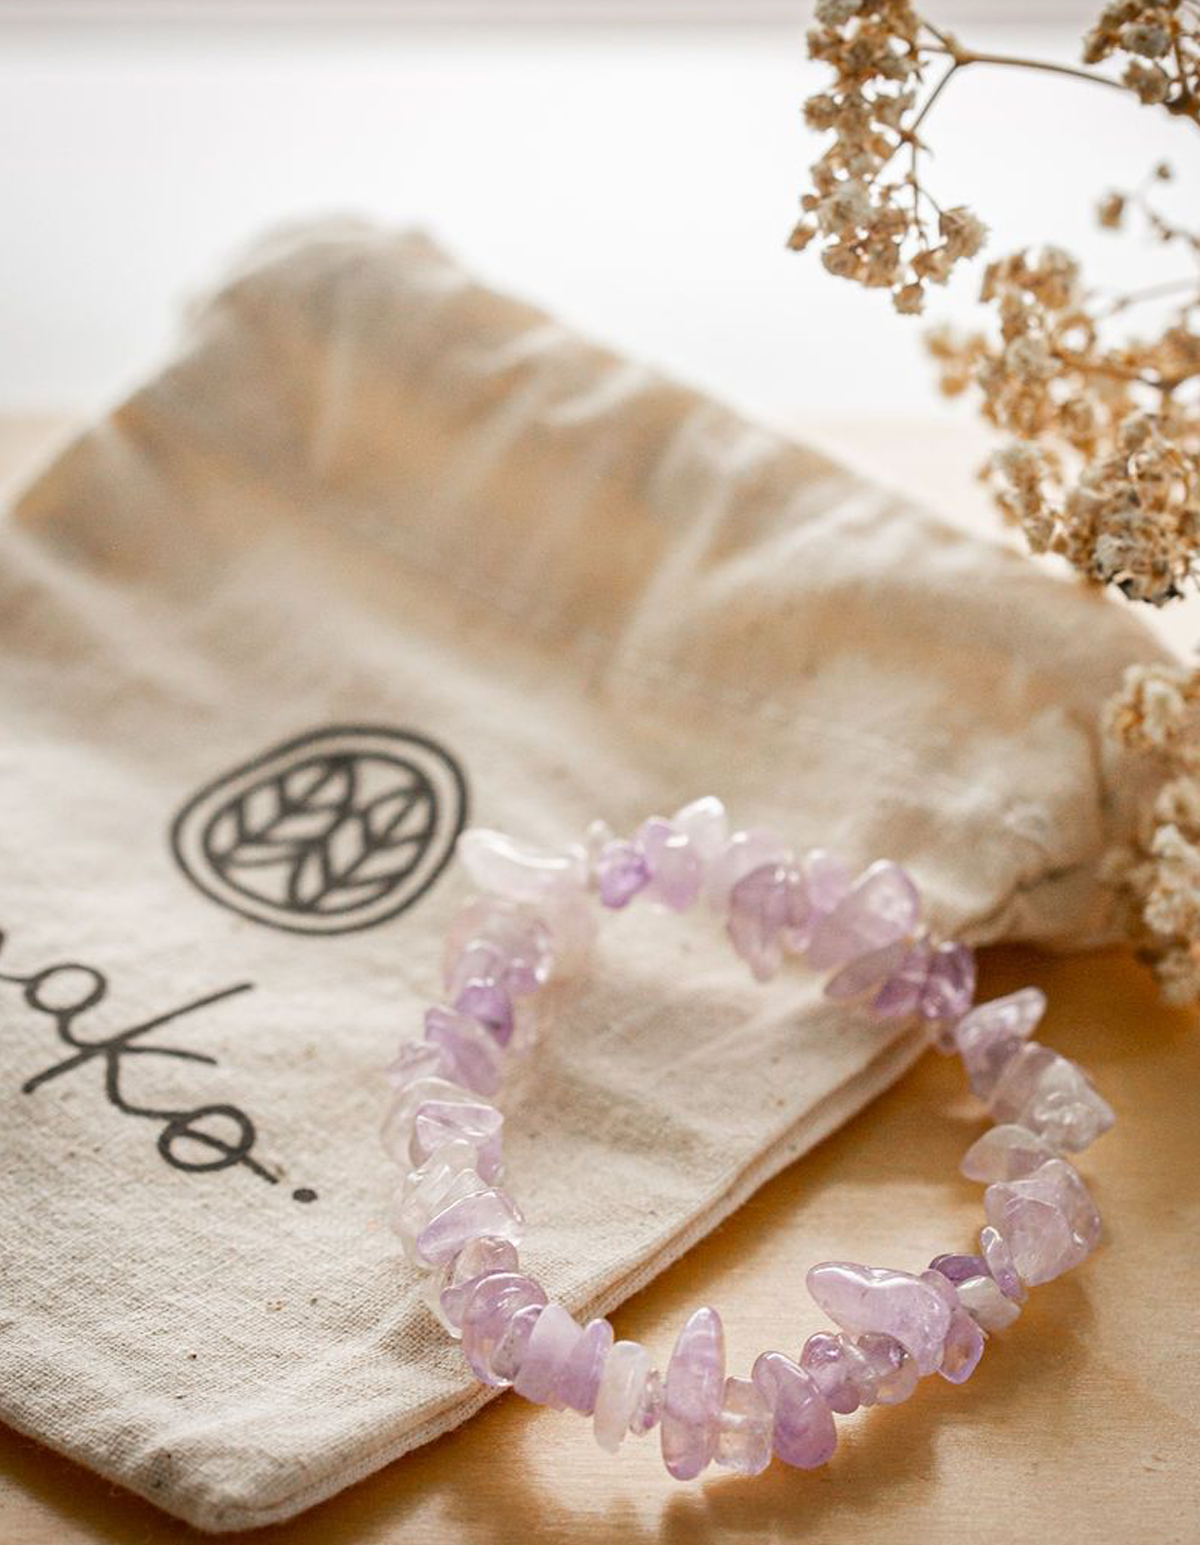 amethyst bracelet Archives - Trusted Source for Hindi people living abroad